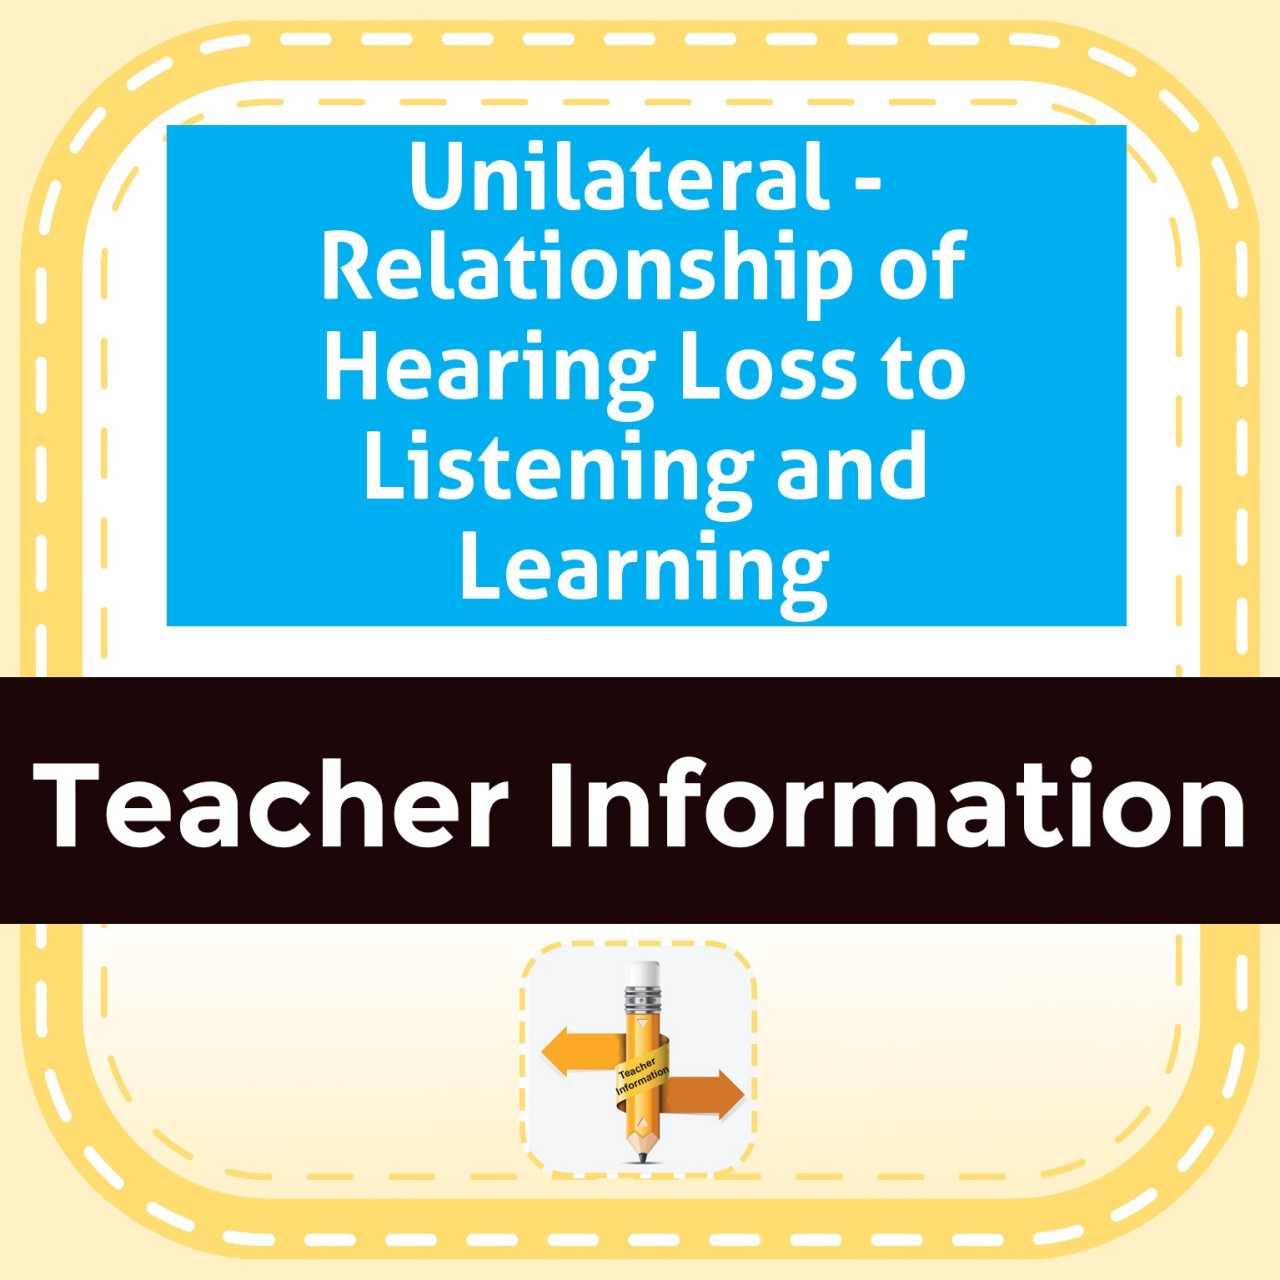 Unilateral - Relationship of Hearing Loss to Listening and Learning